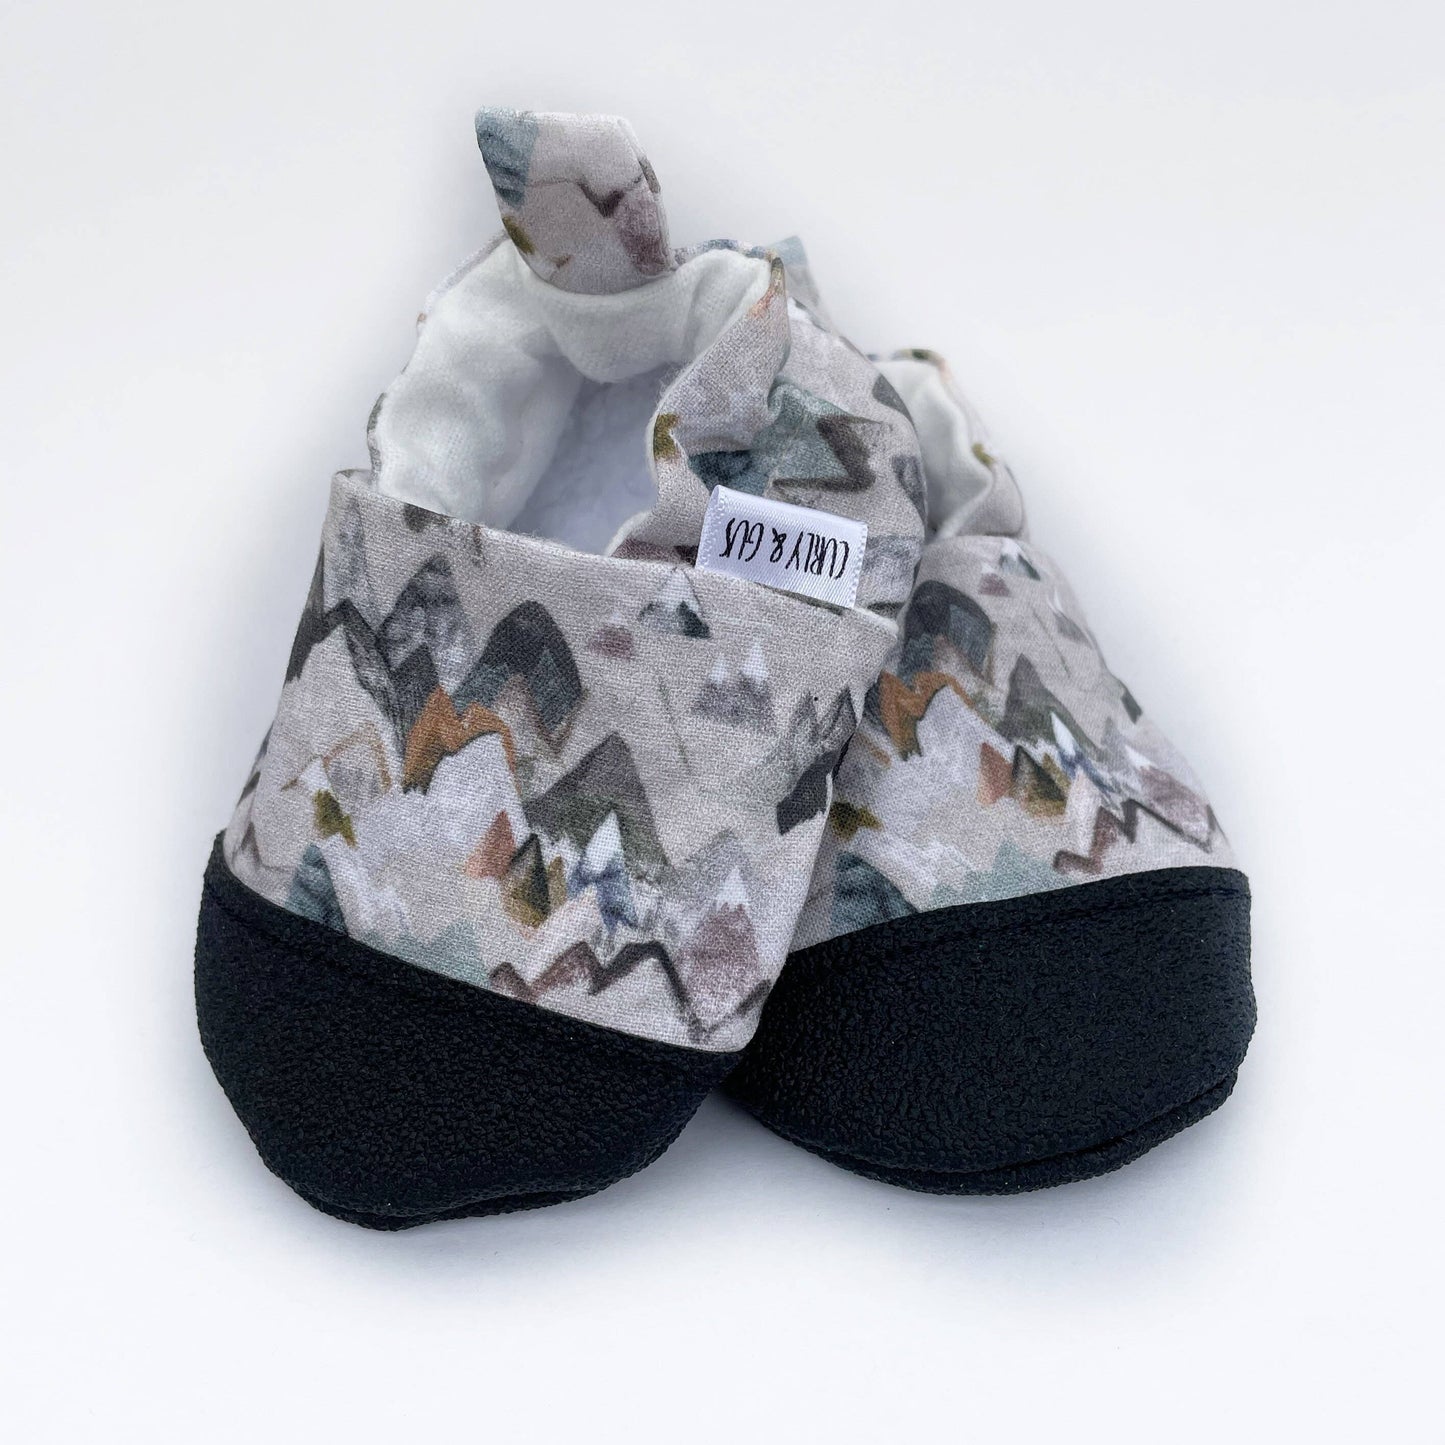 Earthy Mountain Baby Shoes: Rubber w/toe guard / 18-24 months